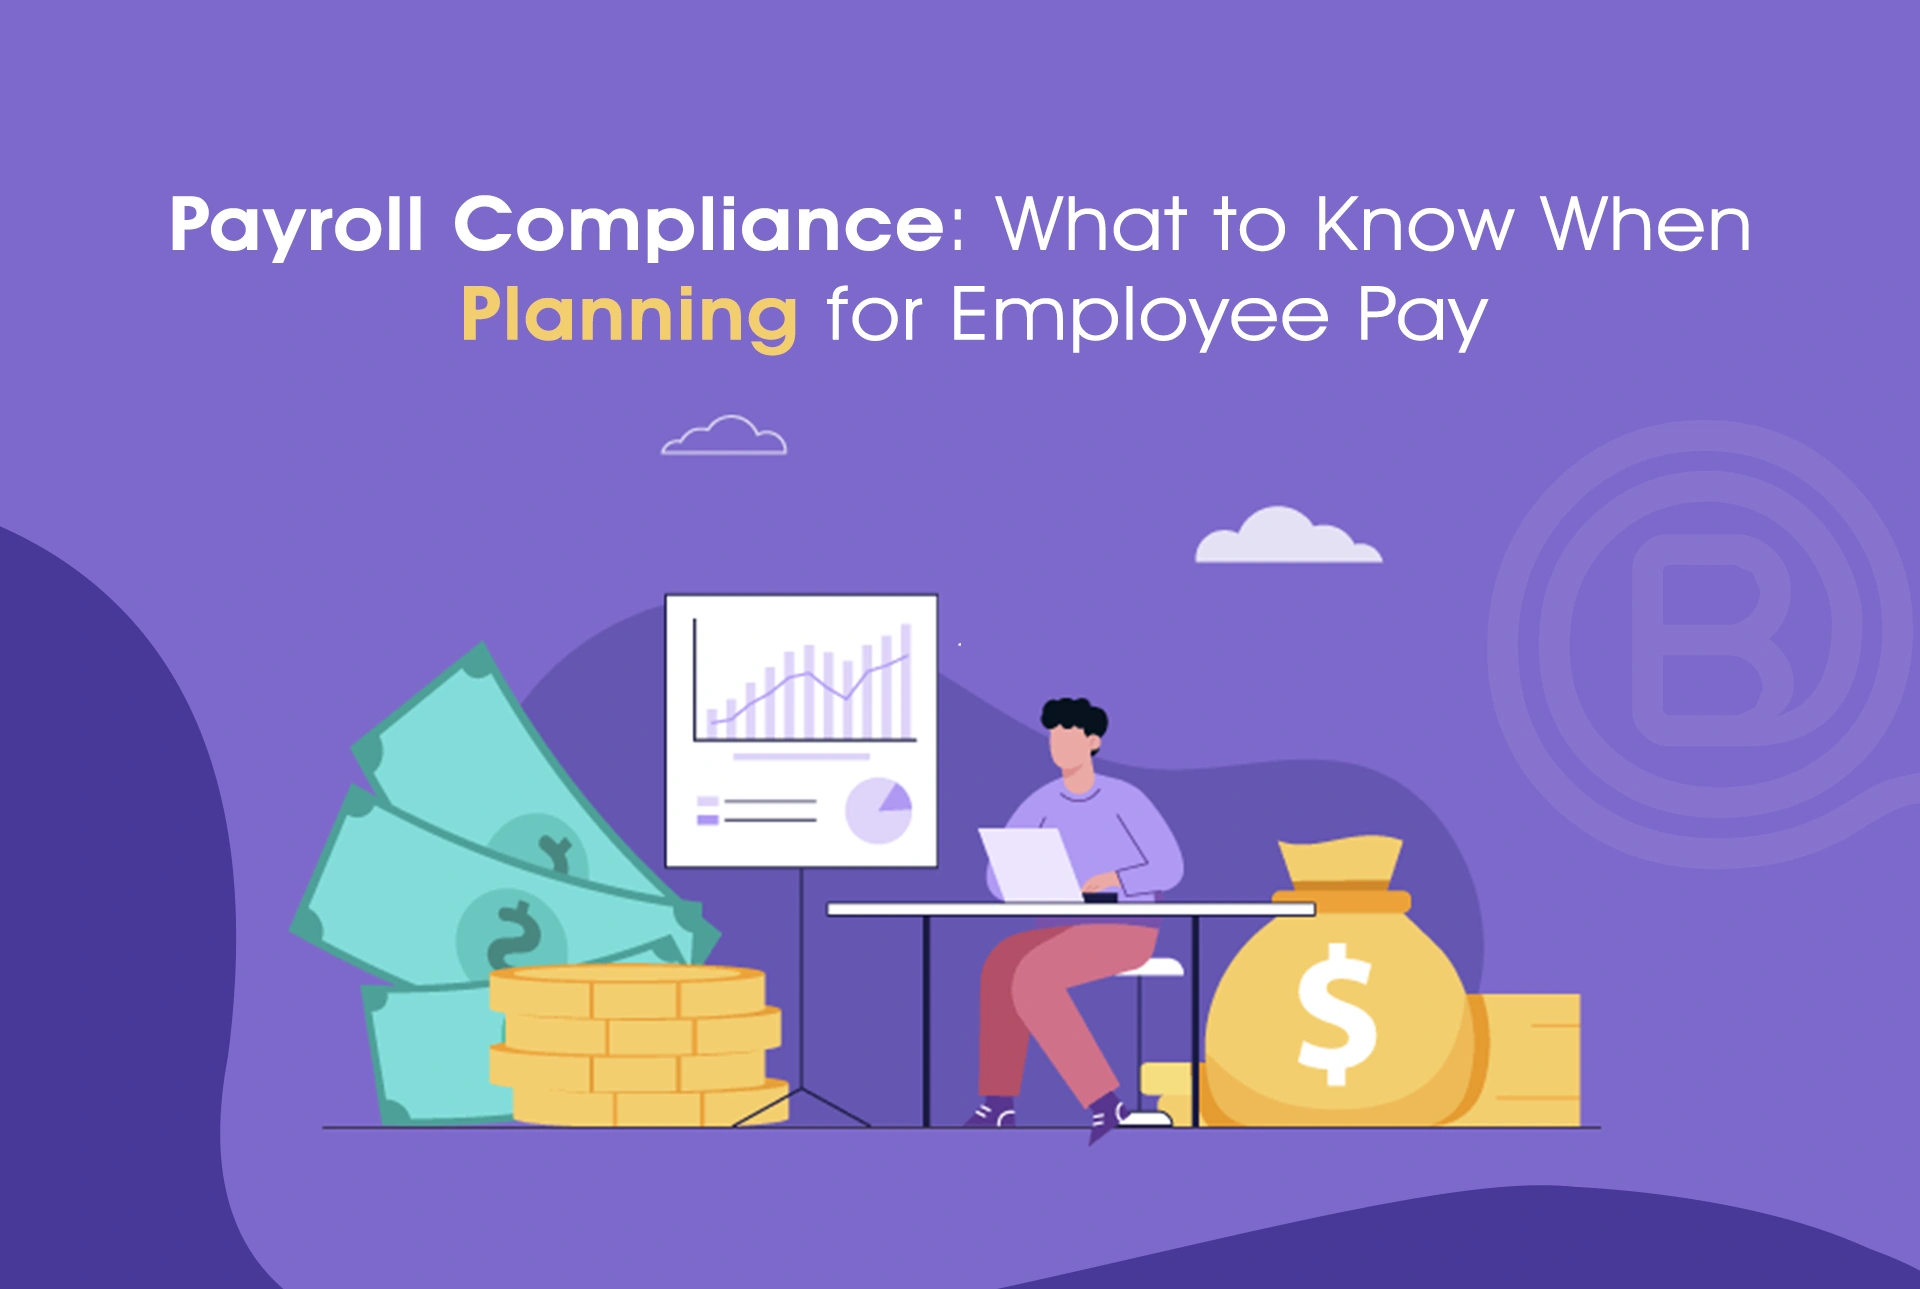 Payroll Compliance: What to Know When Planning for Employee Pay